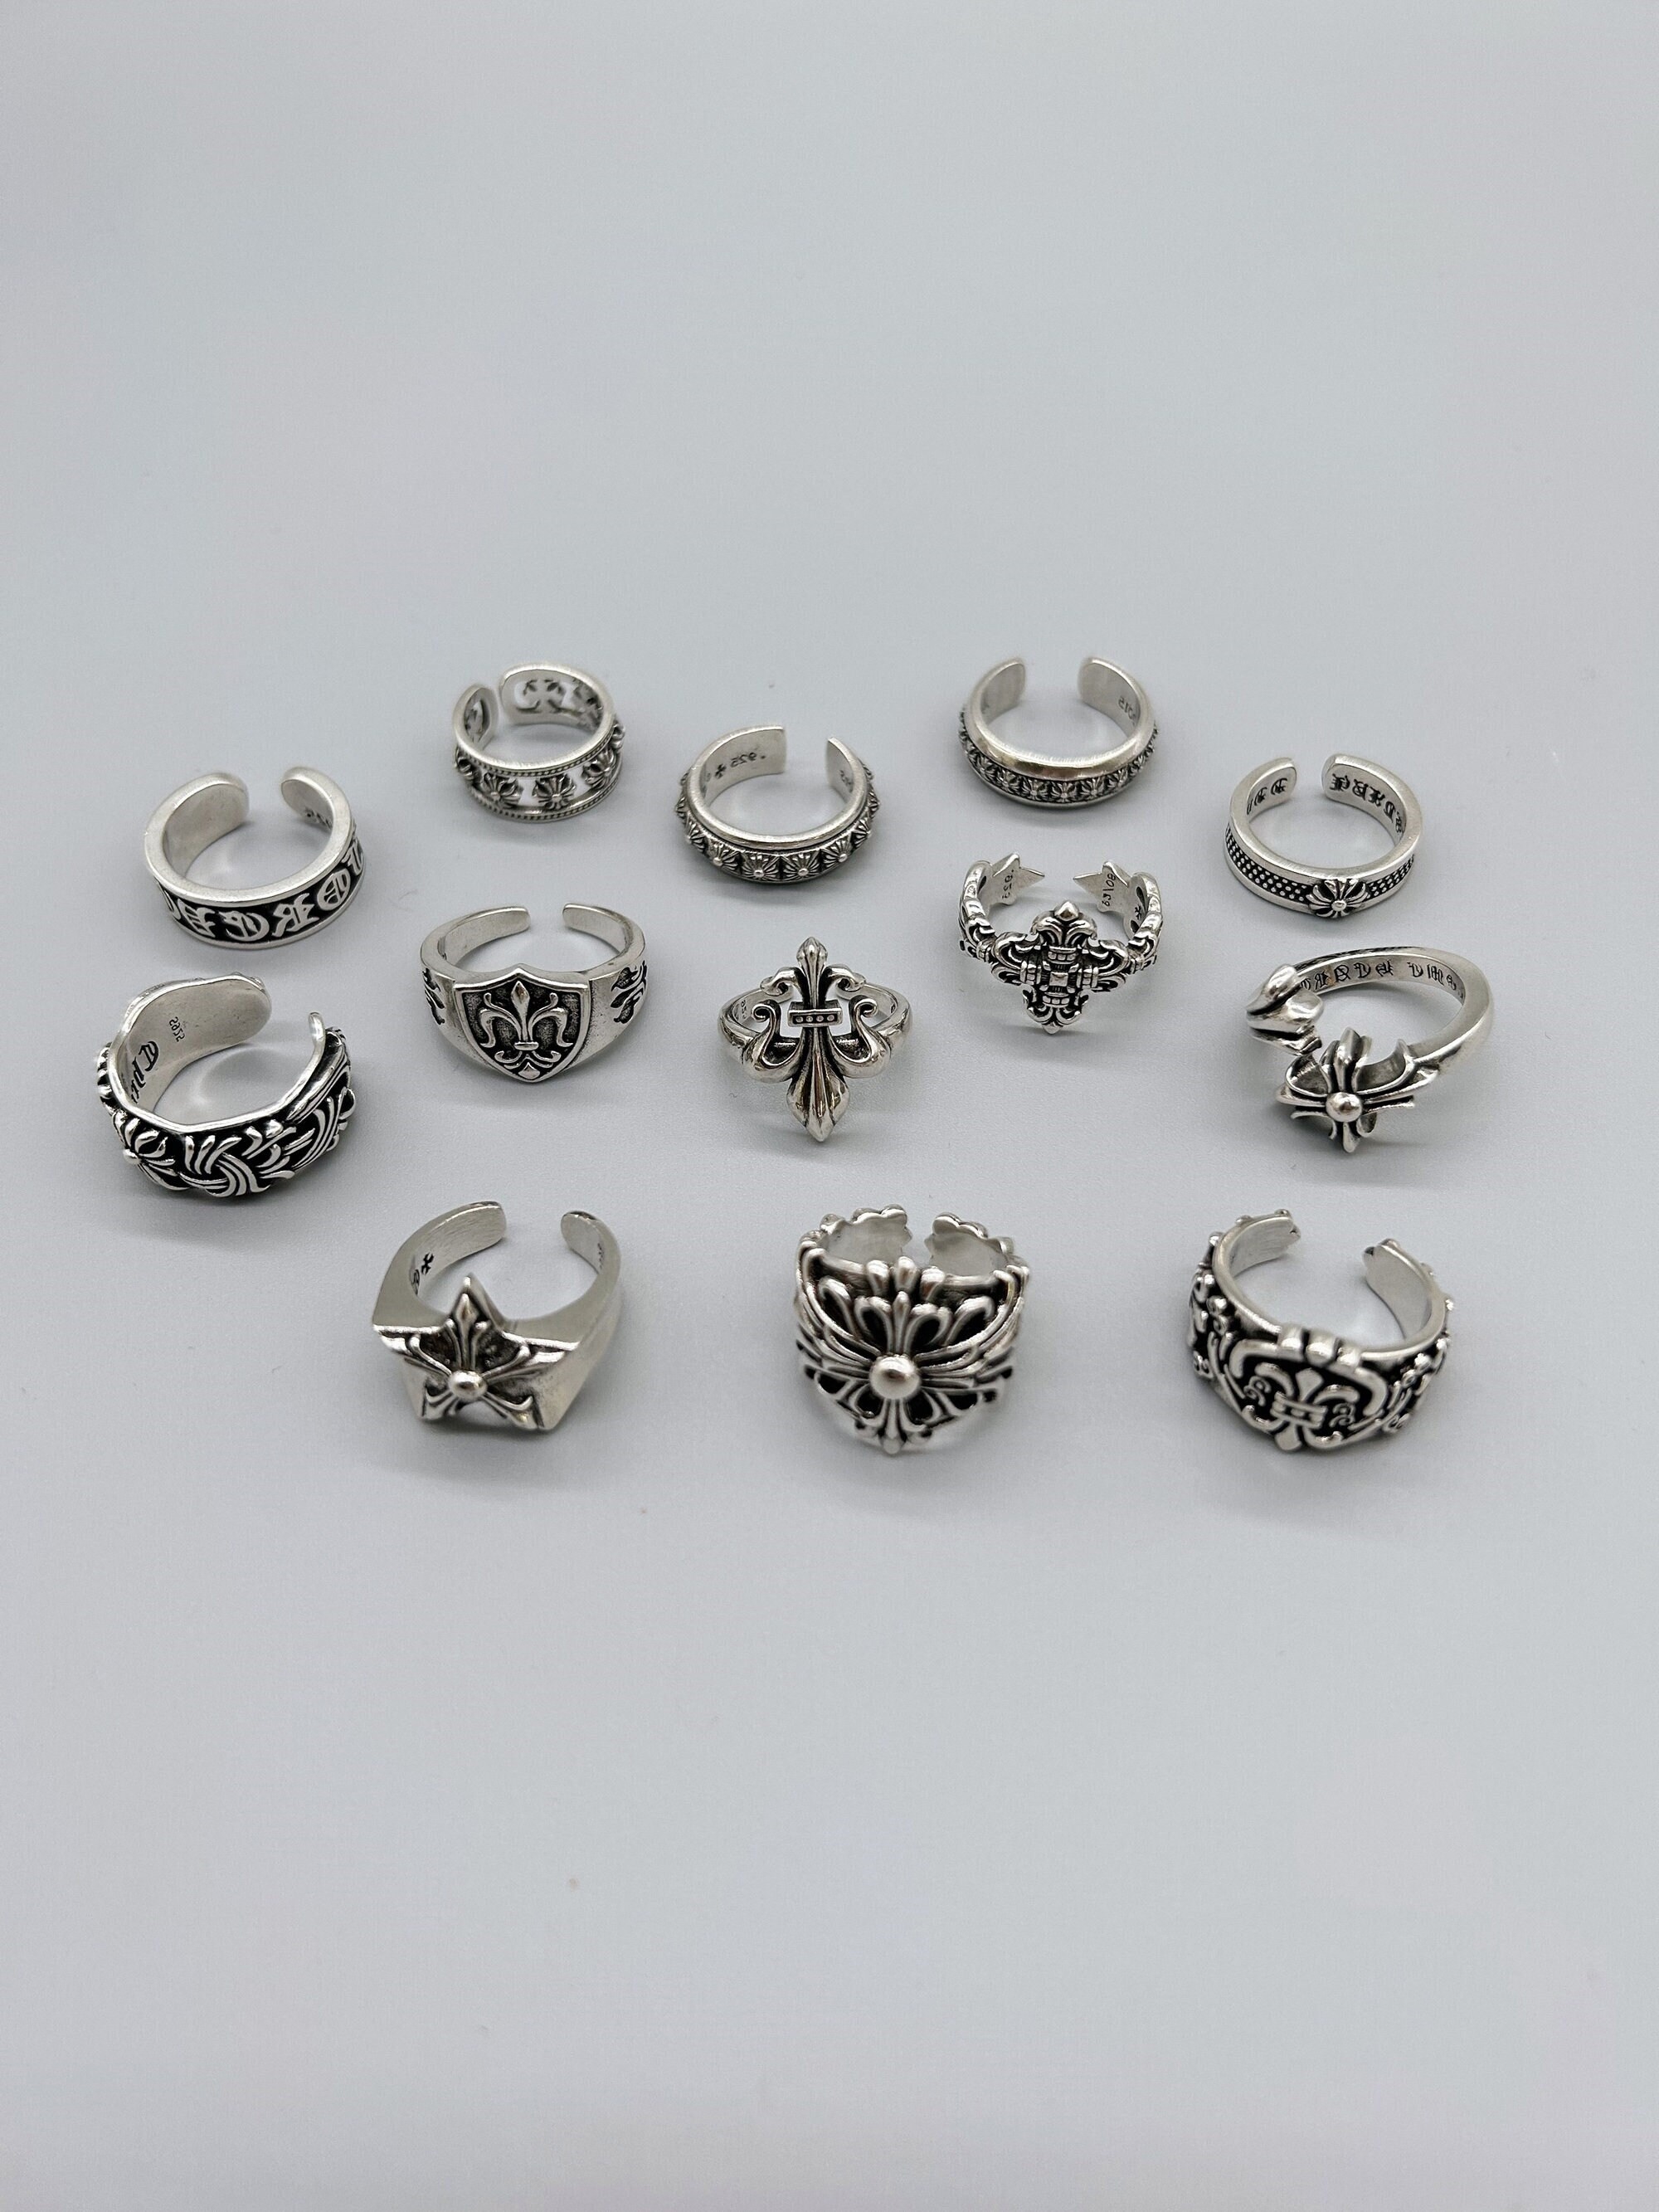 Similar style rings to this Chrome Hearts ring? Not bothered about brand  just like the aesthetic. Budget maybe ~$50 but I am UK based. : r/streetwear